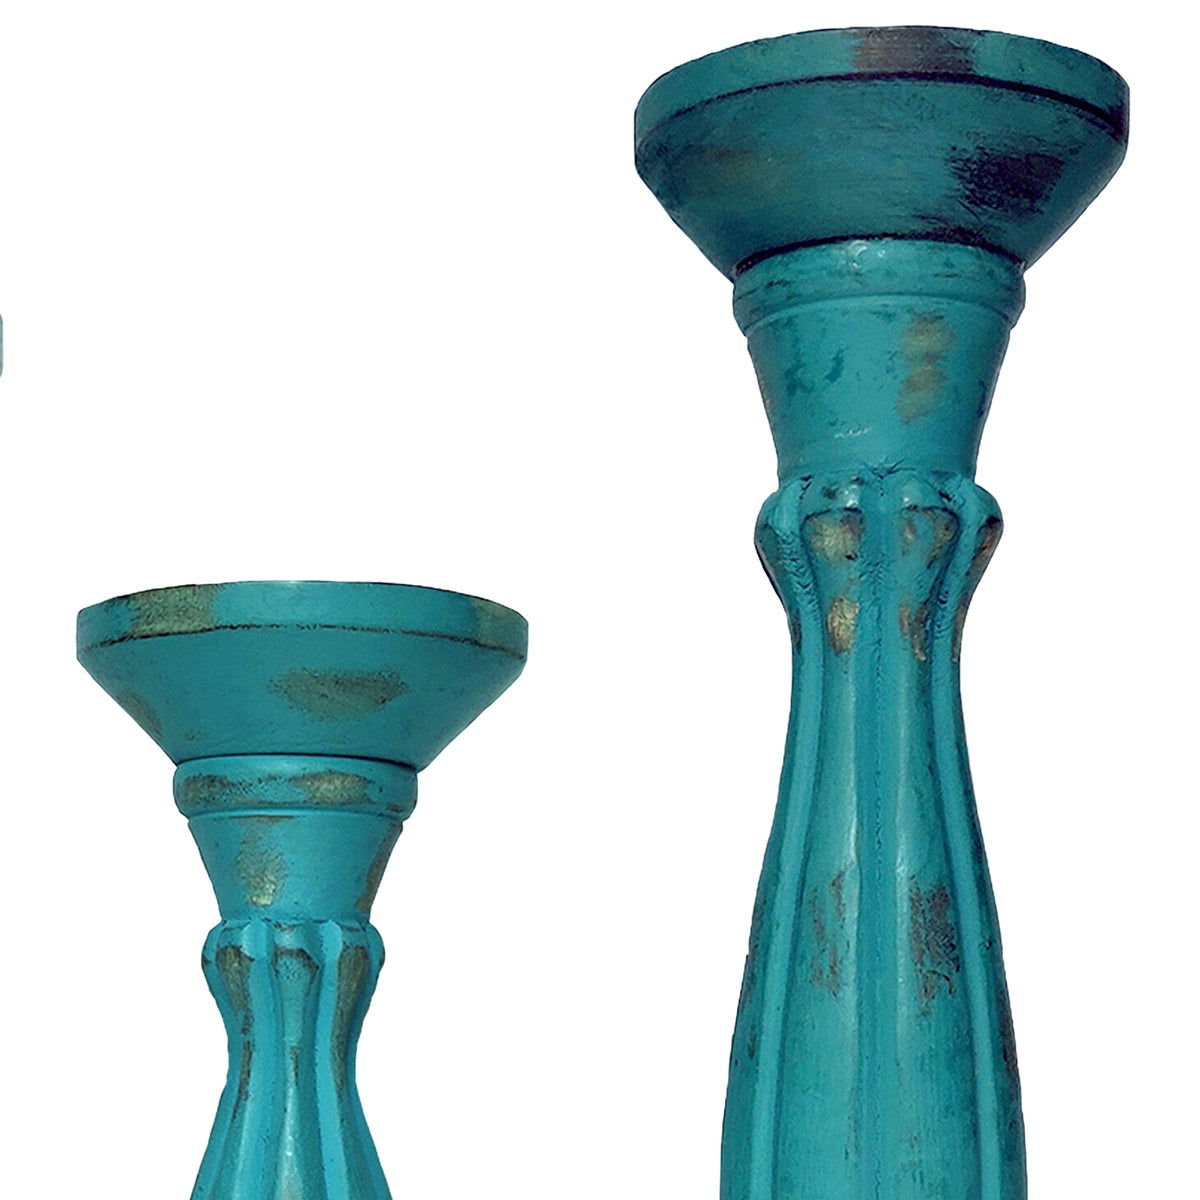 Handmade Wooden Candle Holder with Pillar Base Support, Turquoise Blue, Set of 3 - BM08016